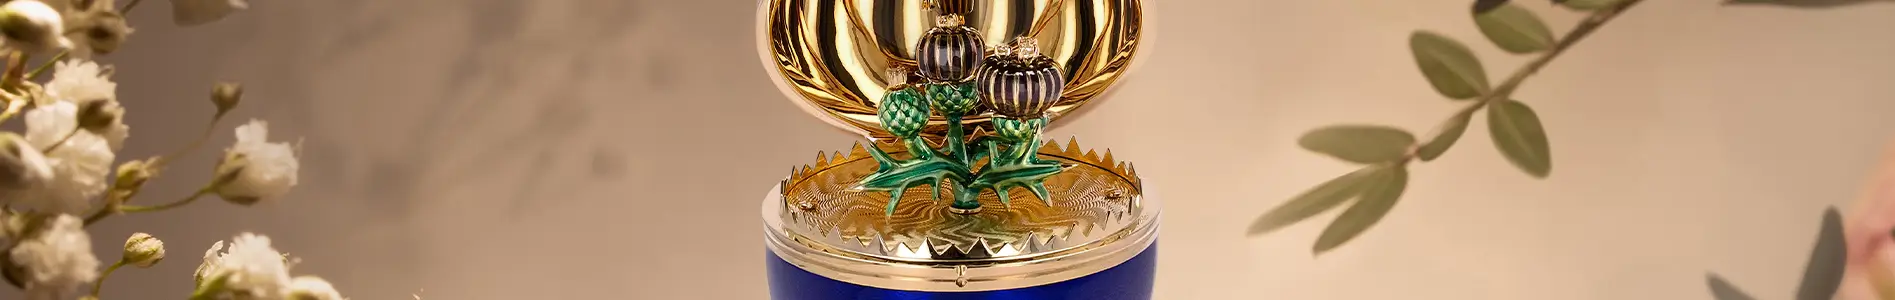 The One-Of-A-Kind Fabergé x Laings Thistle Egg Objet